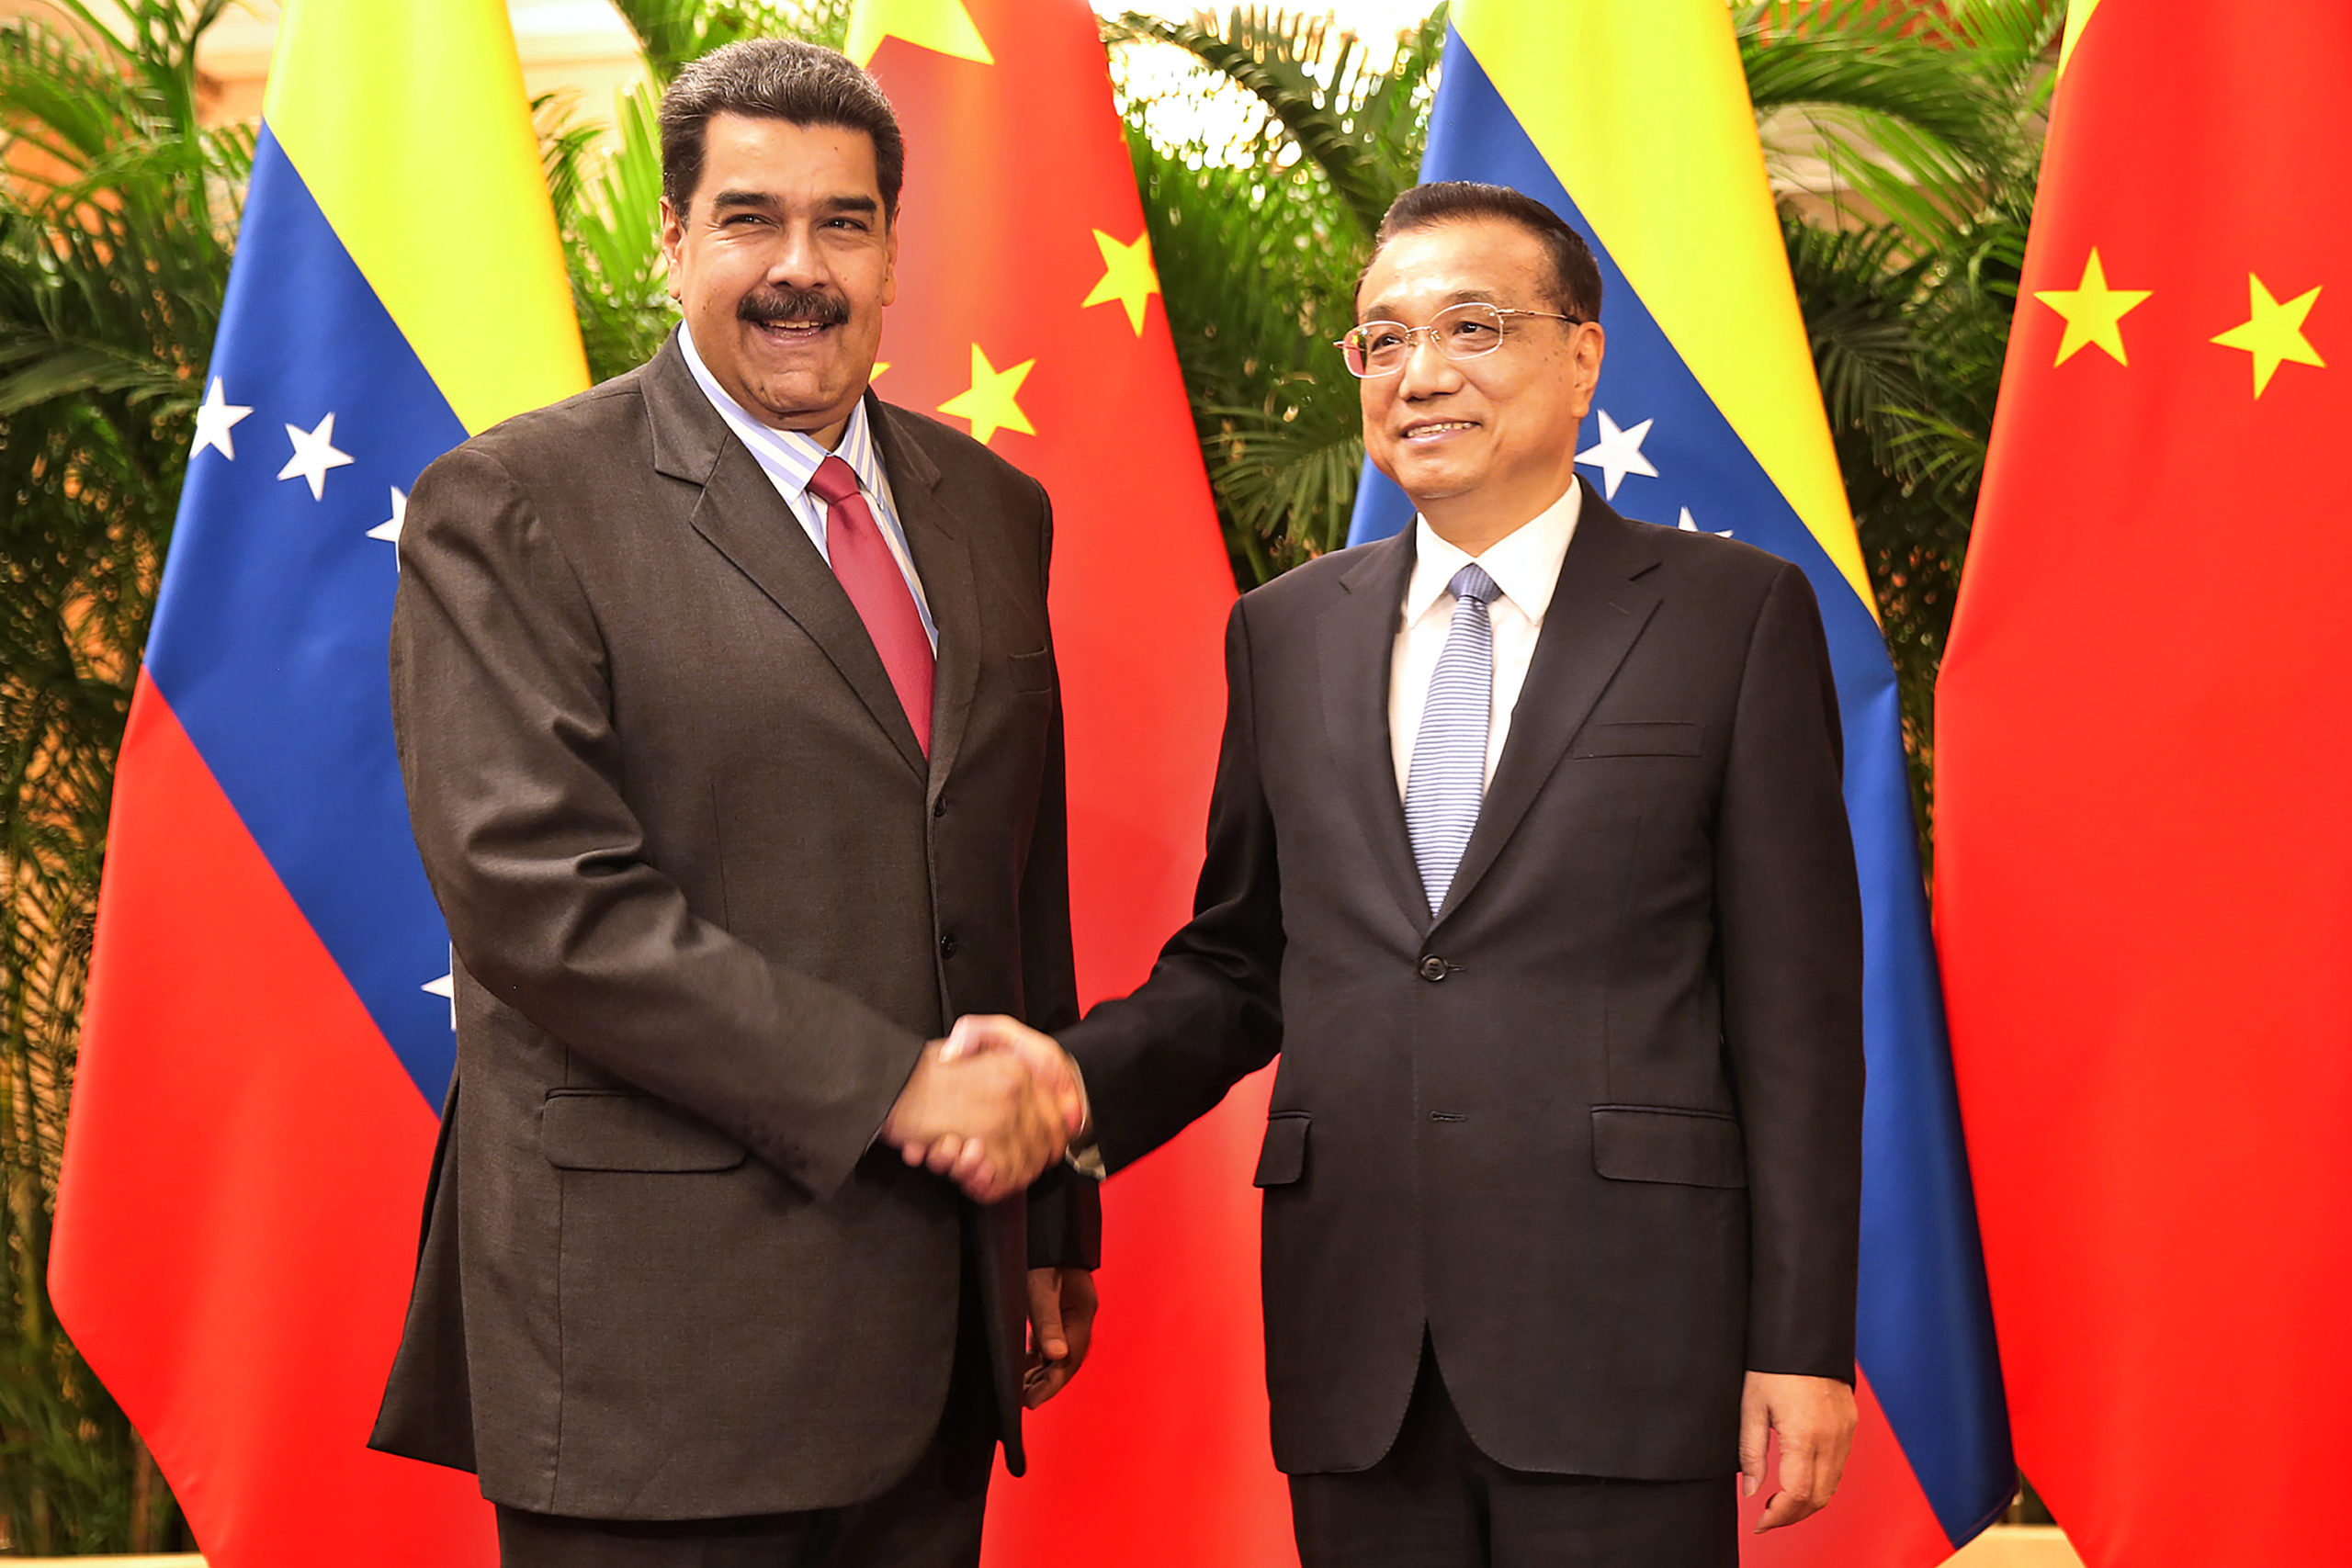 Venezuela’s government is encouraging private firms to sign import and export deals with companies in Asia and the Middle East as part of an effort to limit the impact of U.S. sanctions, according to four sources with knowledge of the matter.